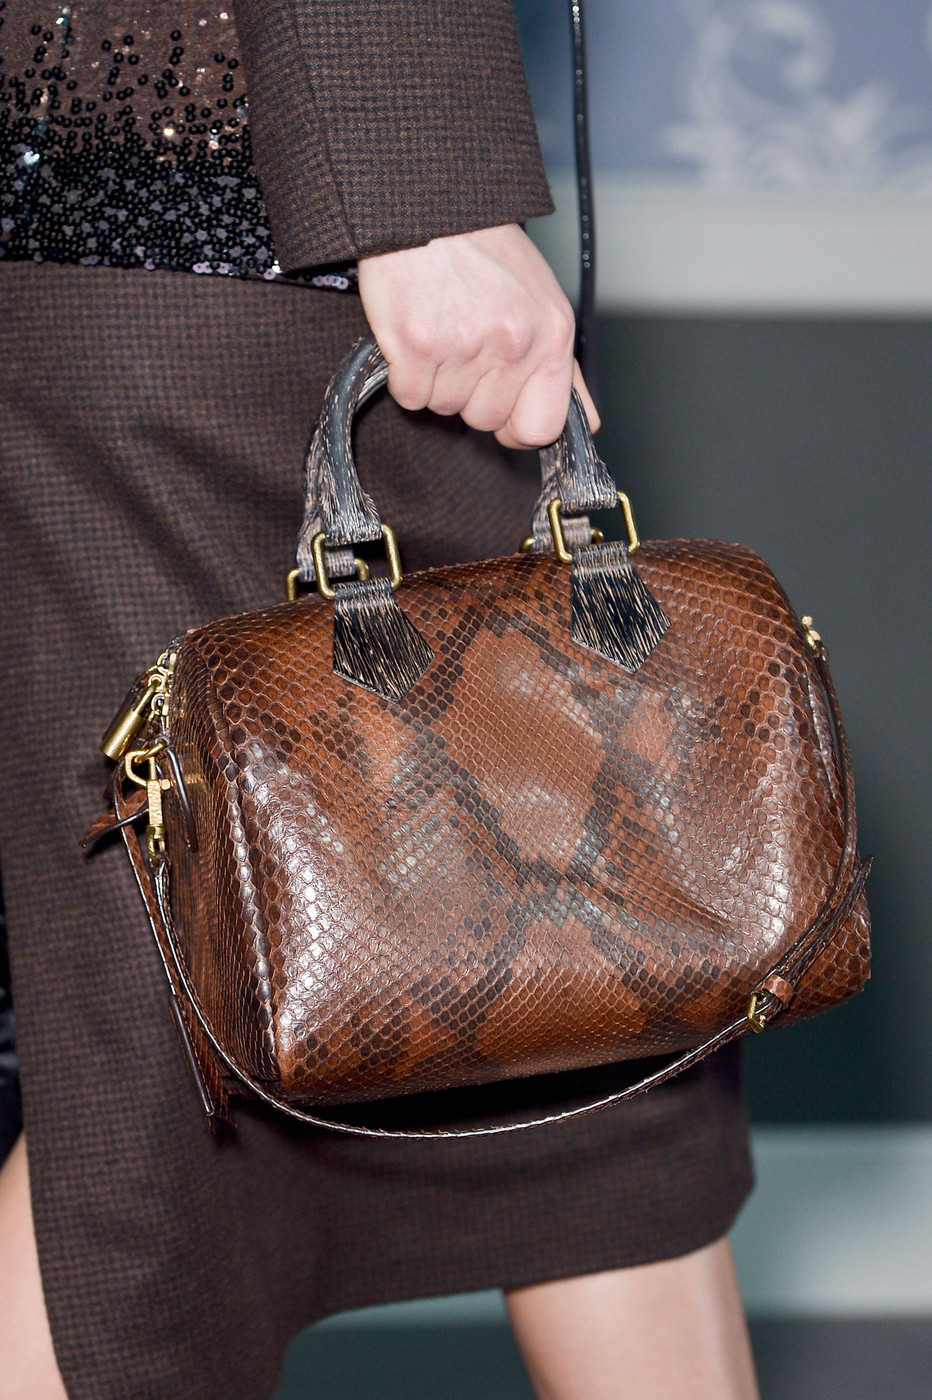 Louis Vuitton Fall Winter 2013 2014: The BAGS |In LVoe with Louis Vuitton